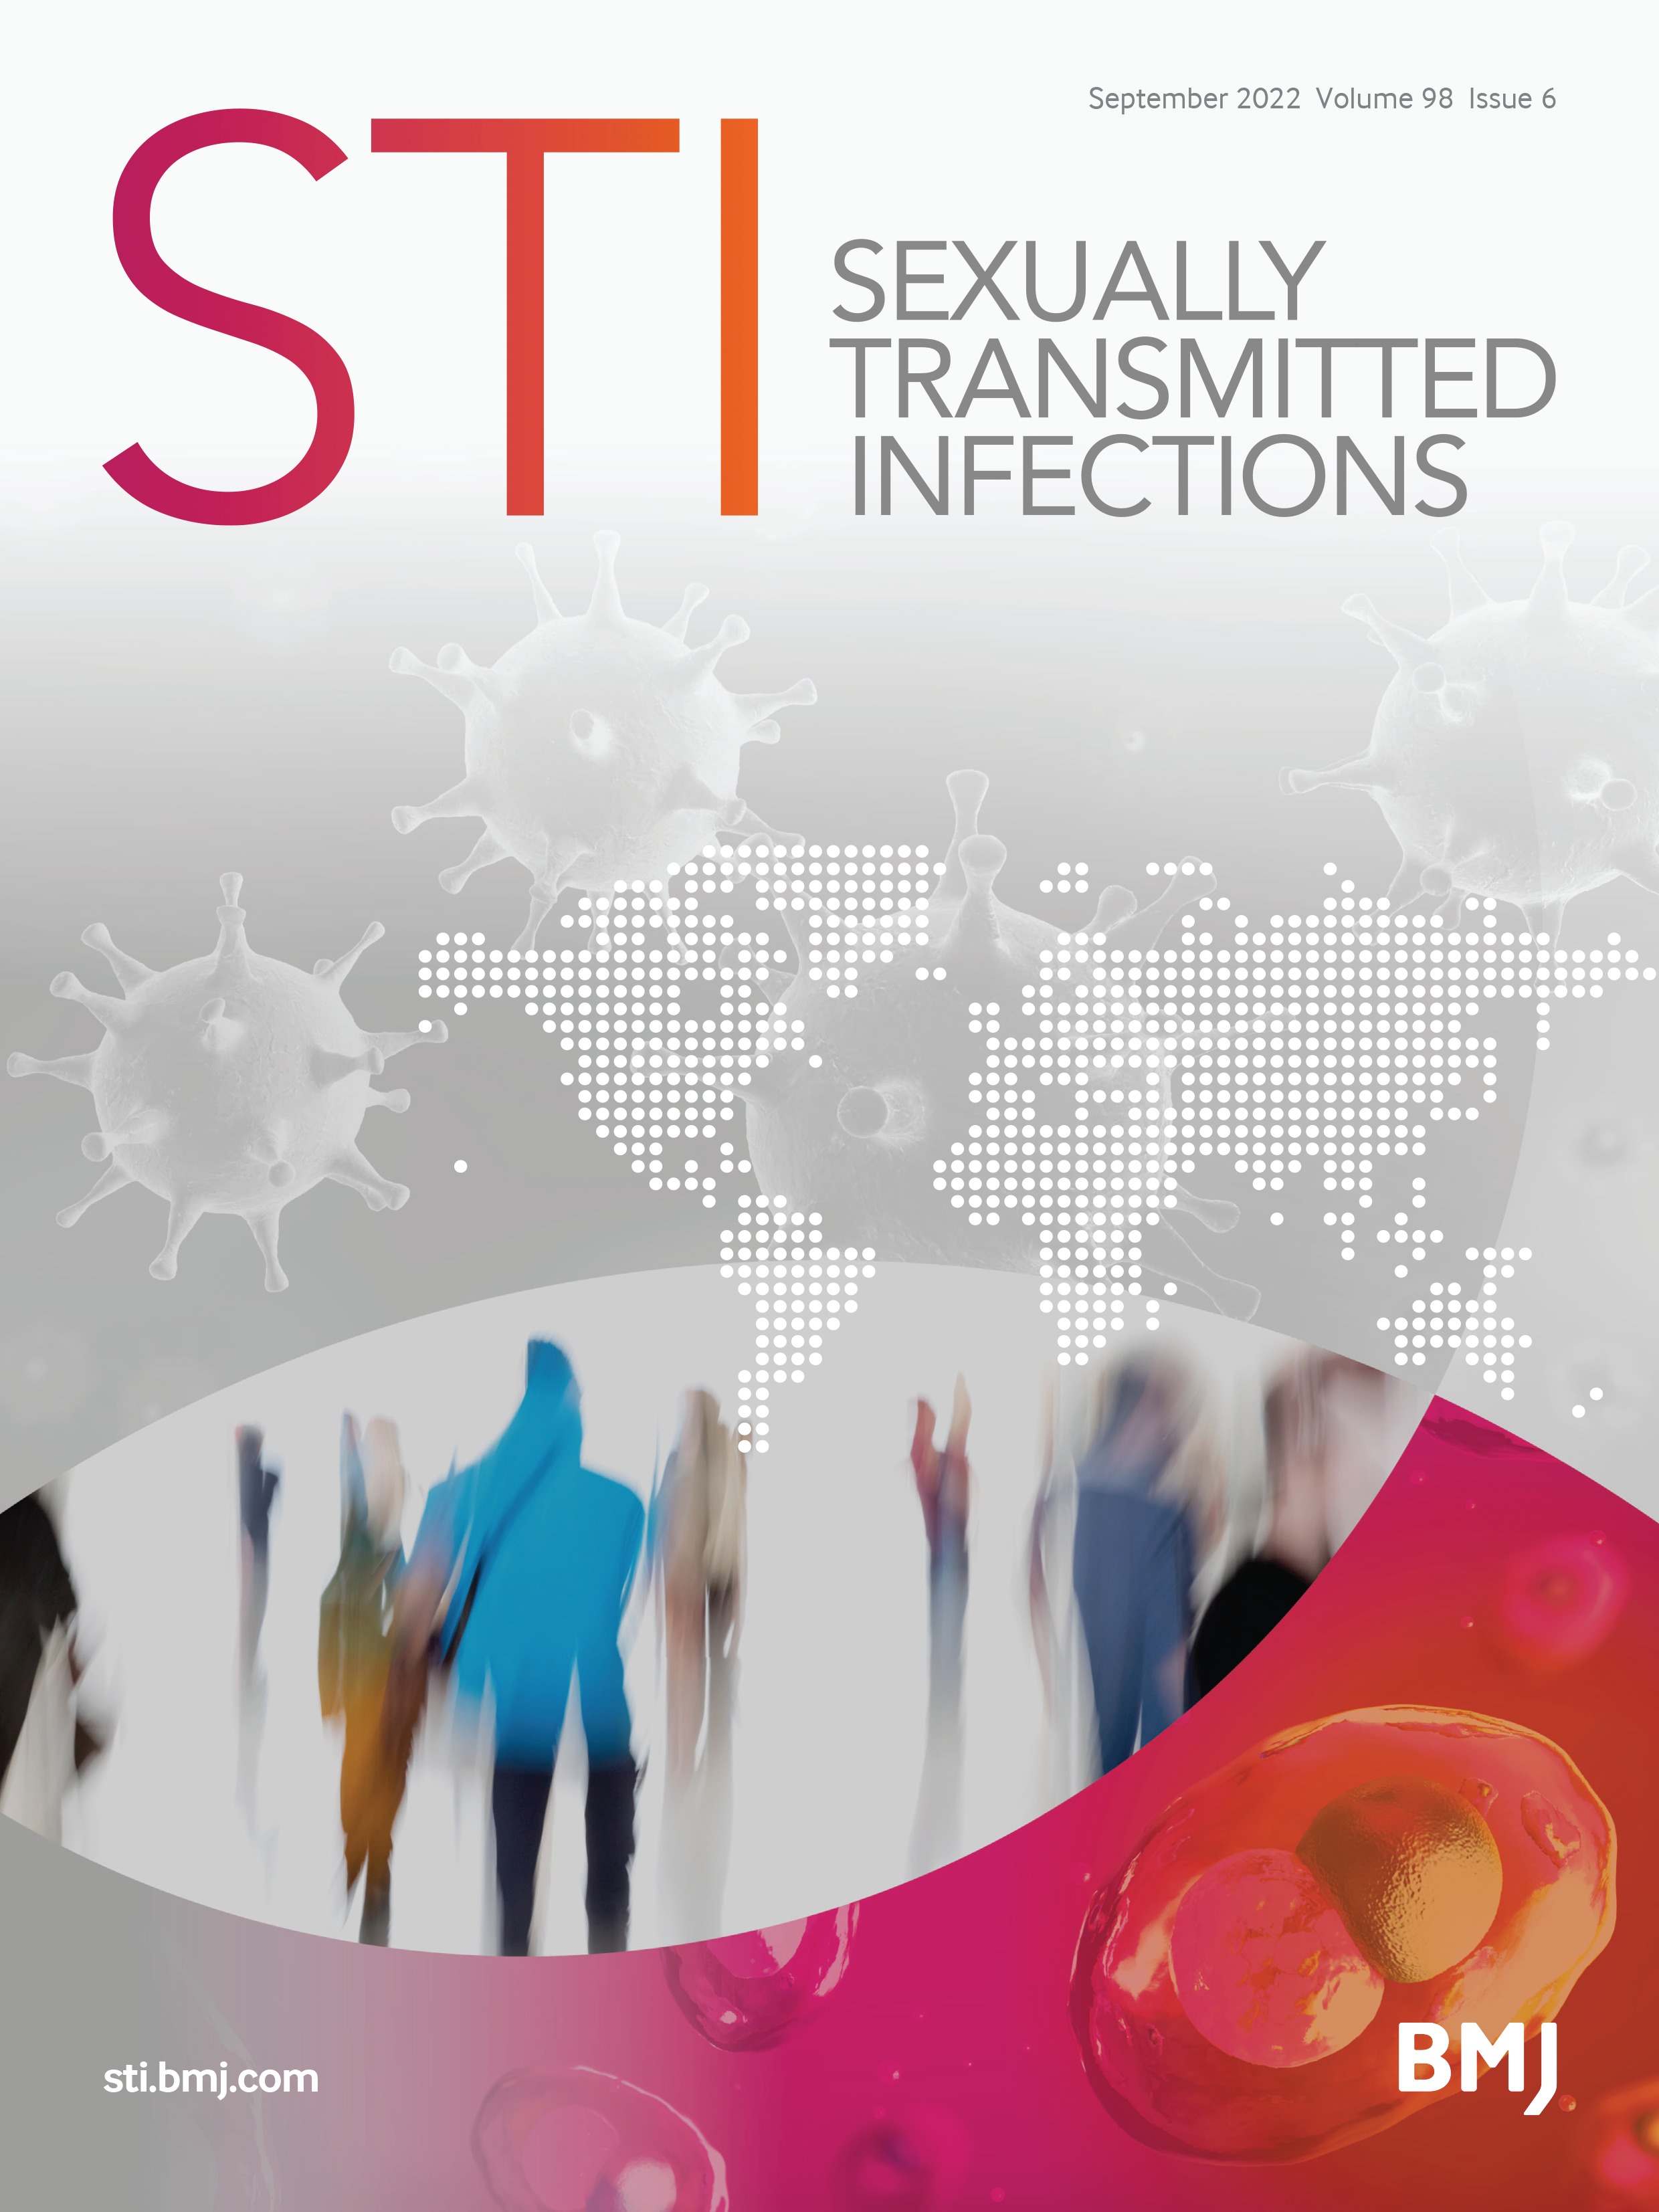 Intensified partner notification and repeat testing can improve the effectiveness of screening in reducing Chlamydia trachomatis prevalence: a mathematical modelling study